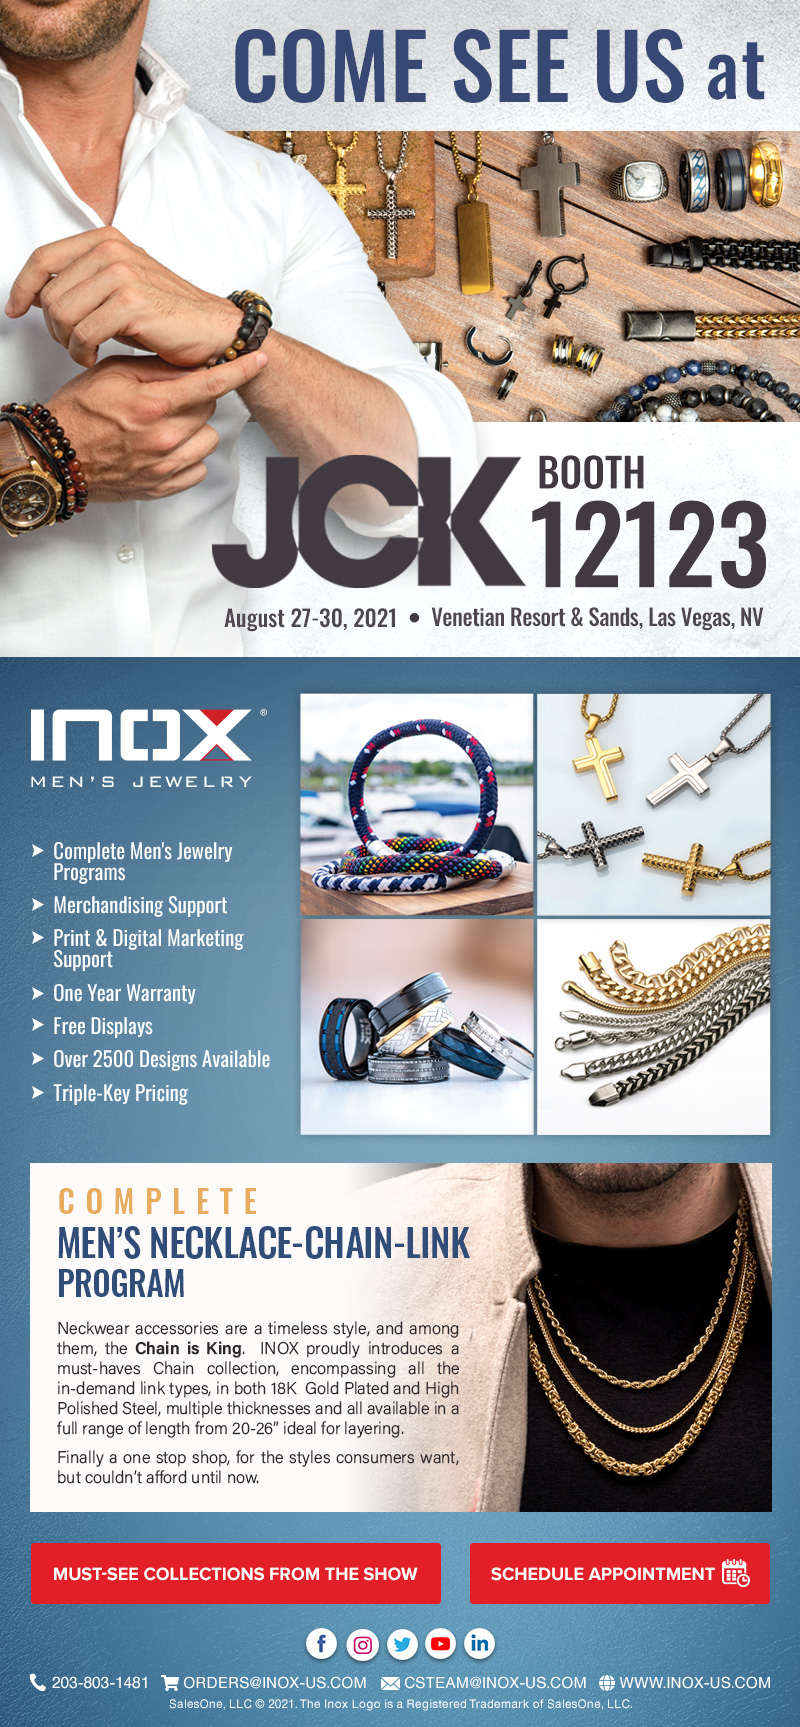 Come see INOX at JCK Booth 12123